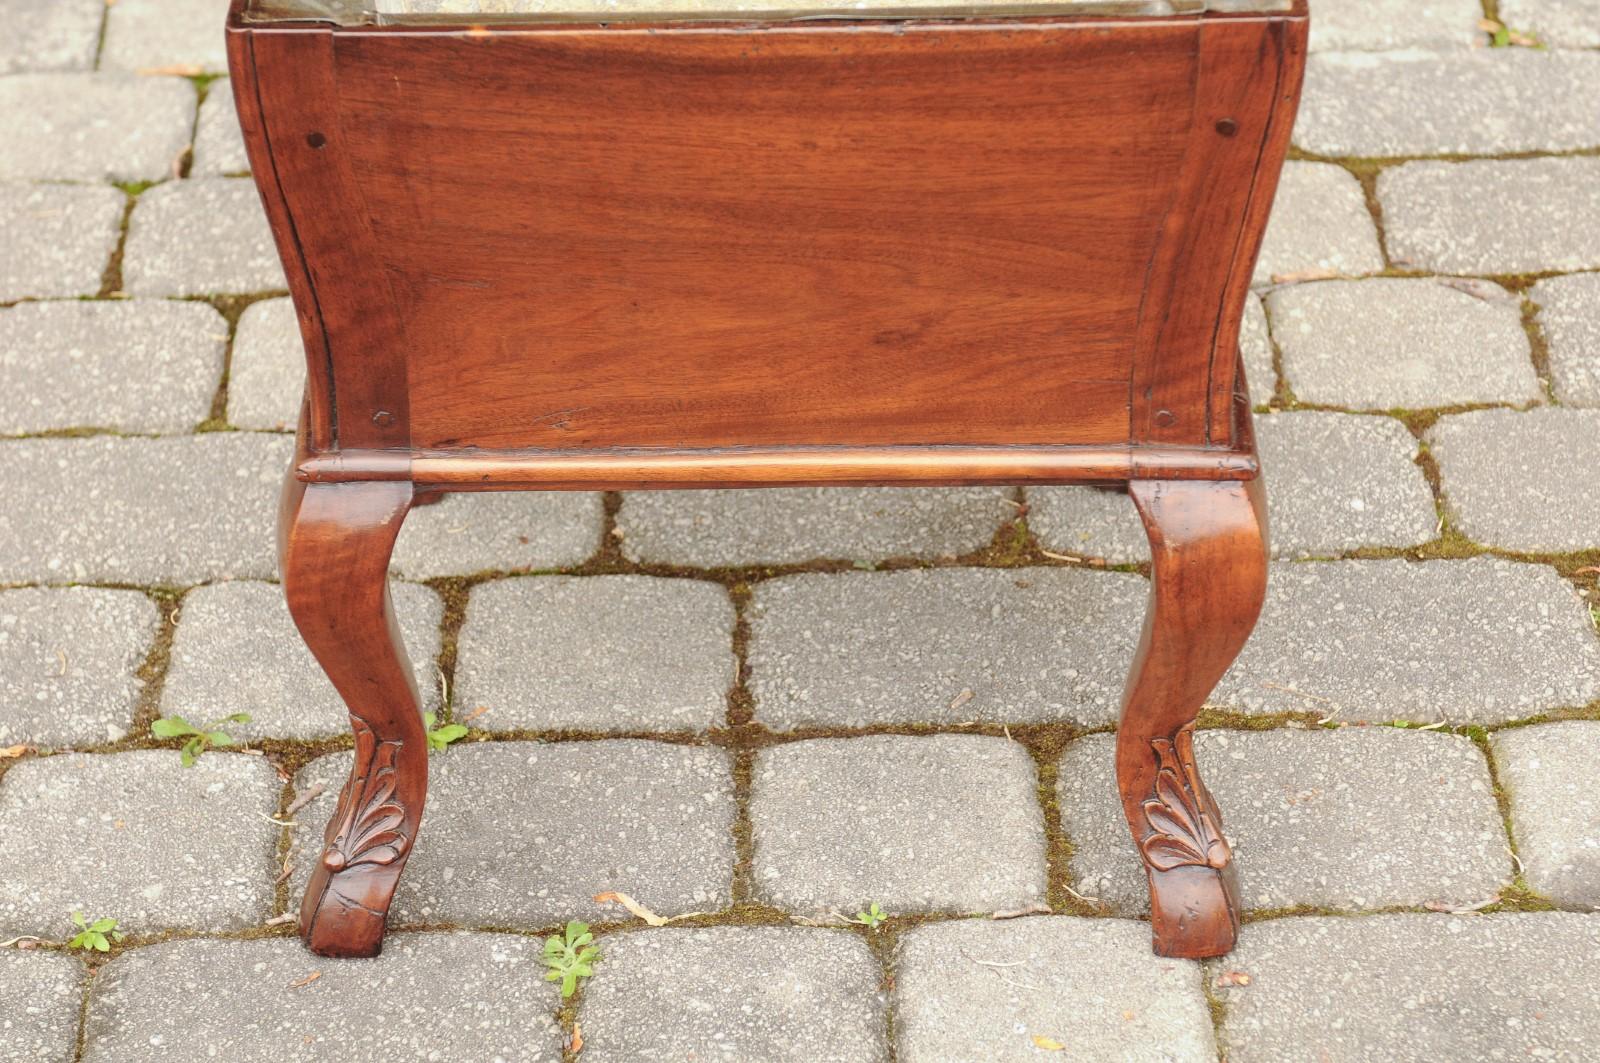 French Napoleon III Period Walnut Planter with Tin Interior and Cabriole Legs For Sale 4